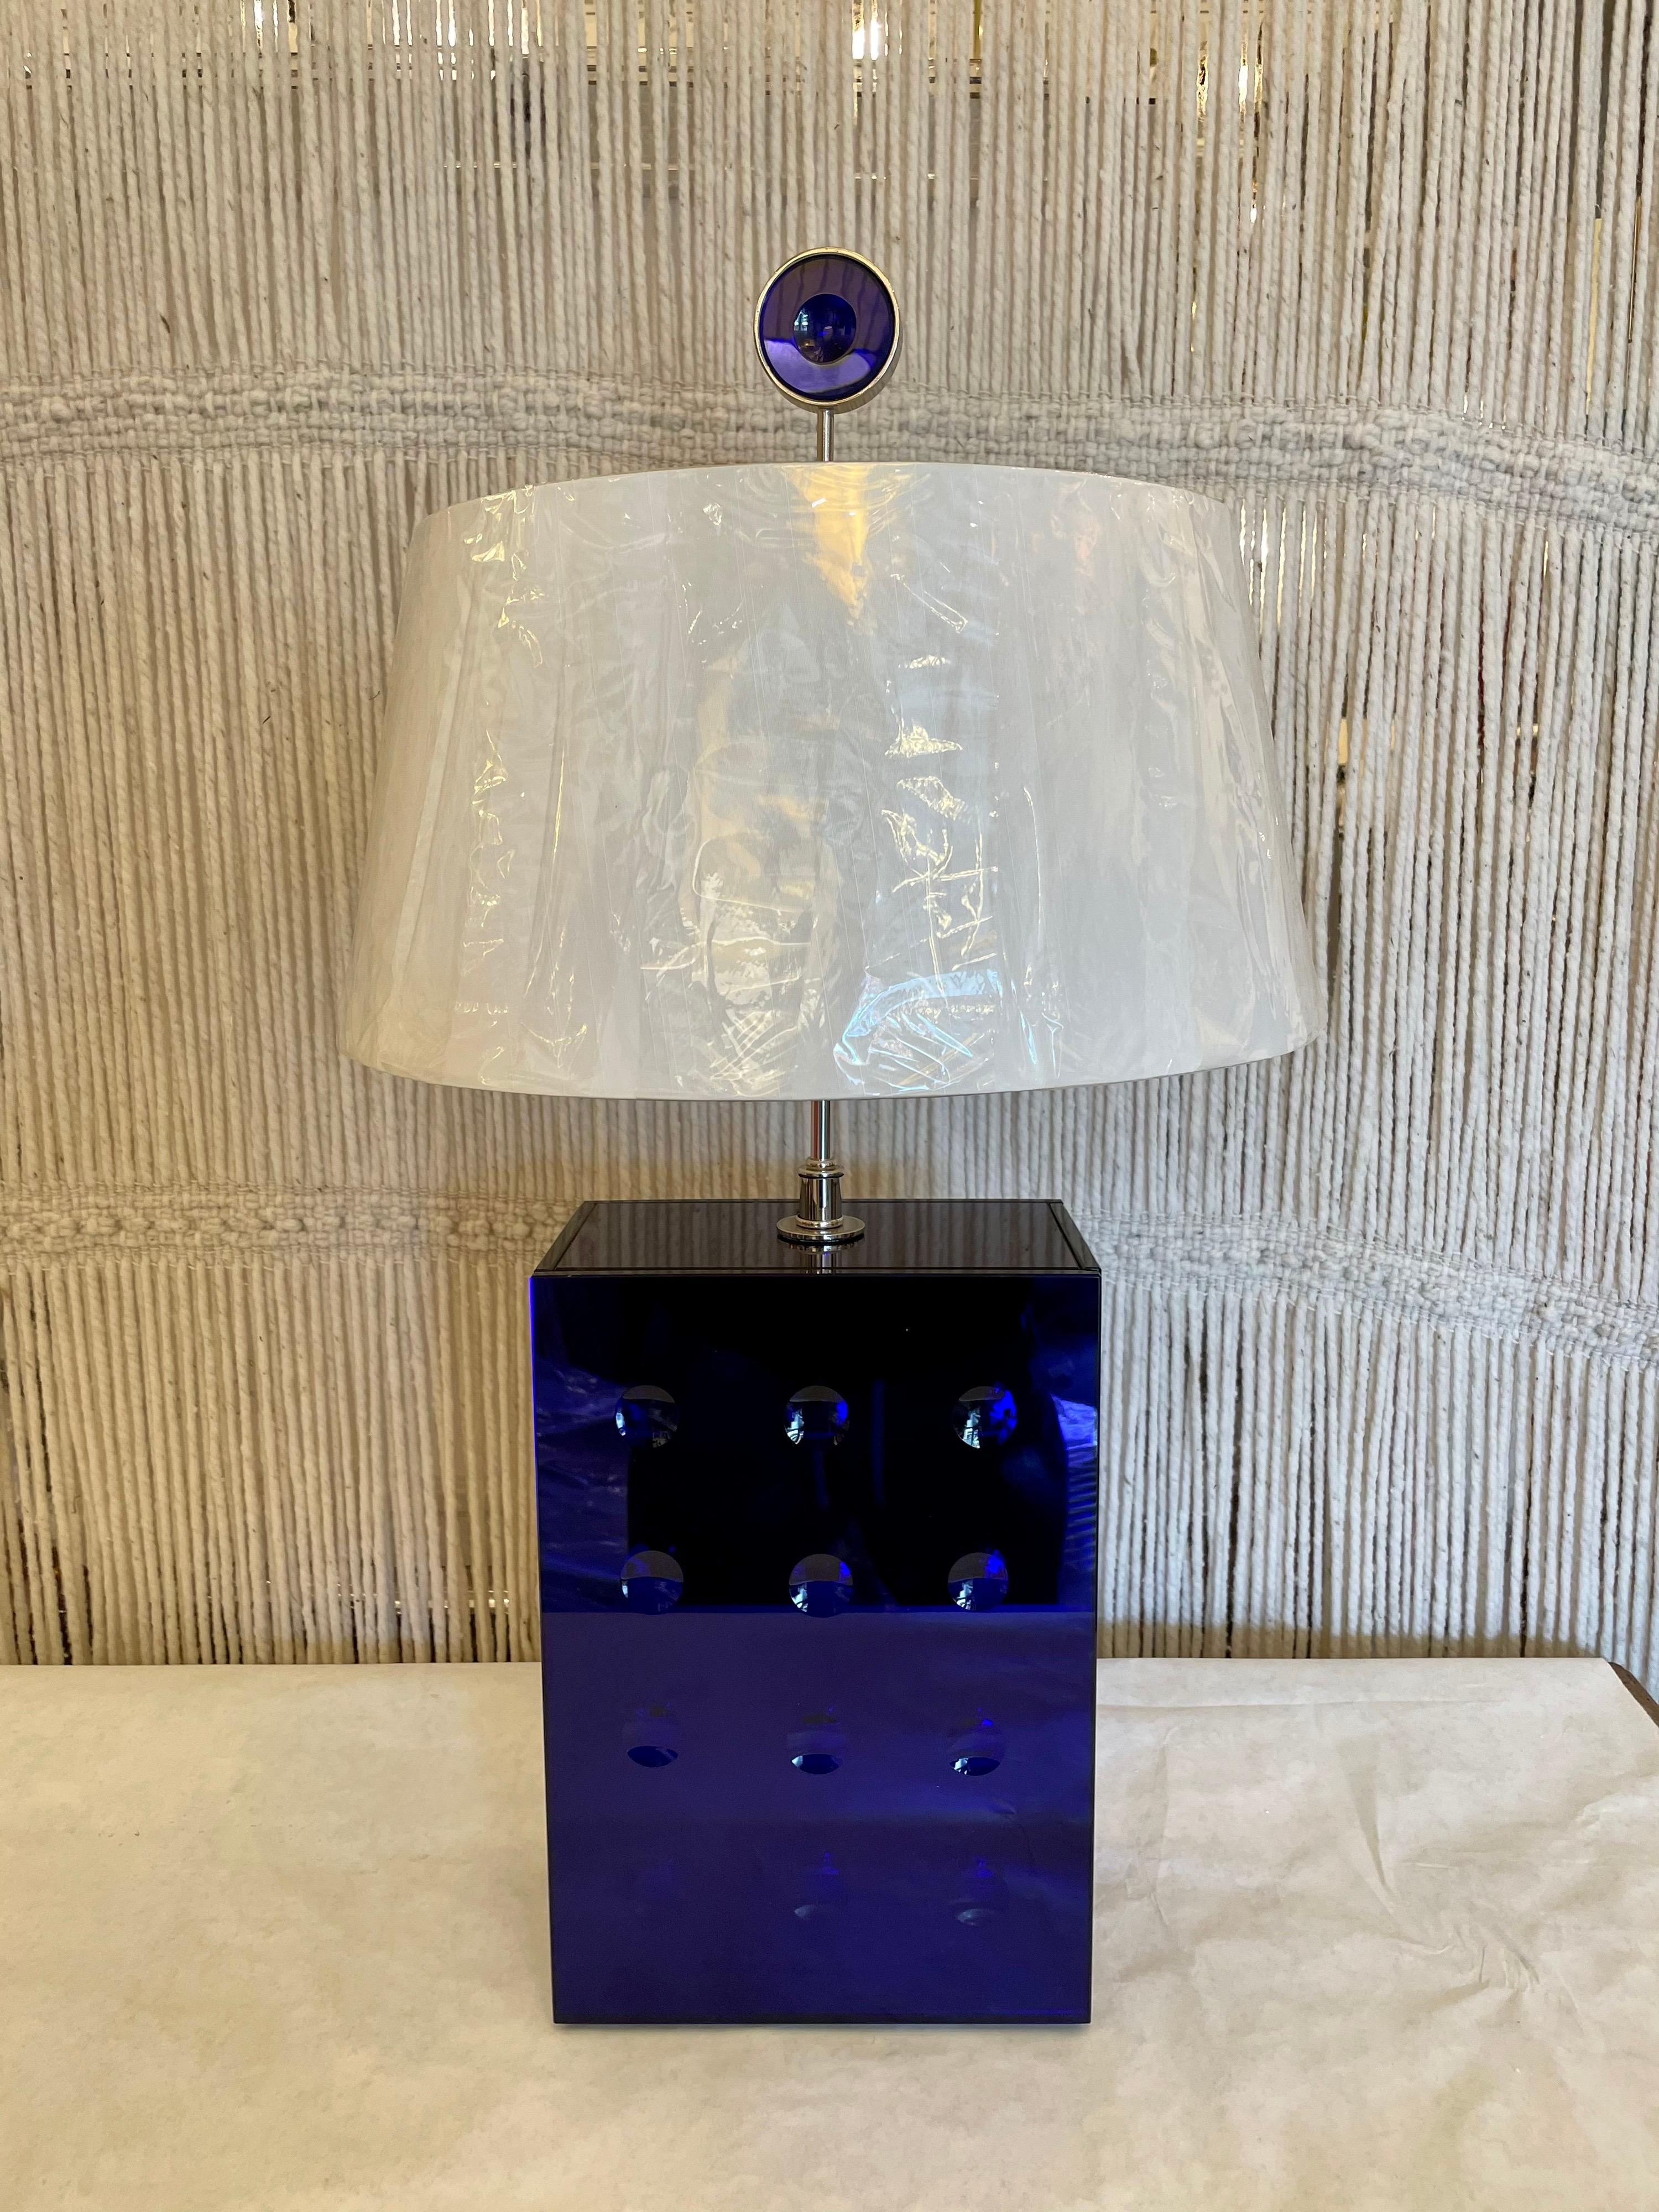 Roberto Rida made for Lorin Marsh. Metal stamped on bottom, Italy, 2000s. Contemporary glass lamp base. Cut cobalt glass with nickeled brass hardware. With original finial. Dimensions: H 13